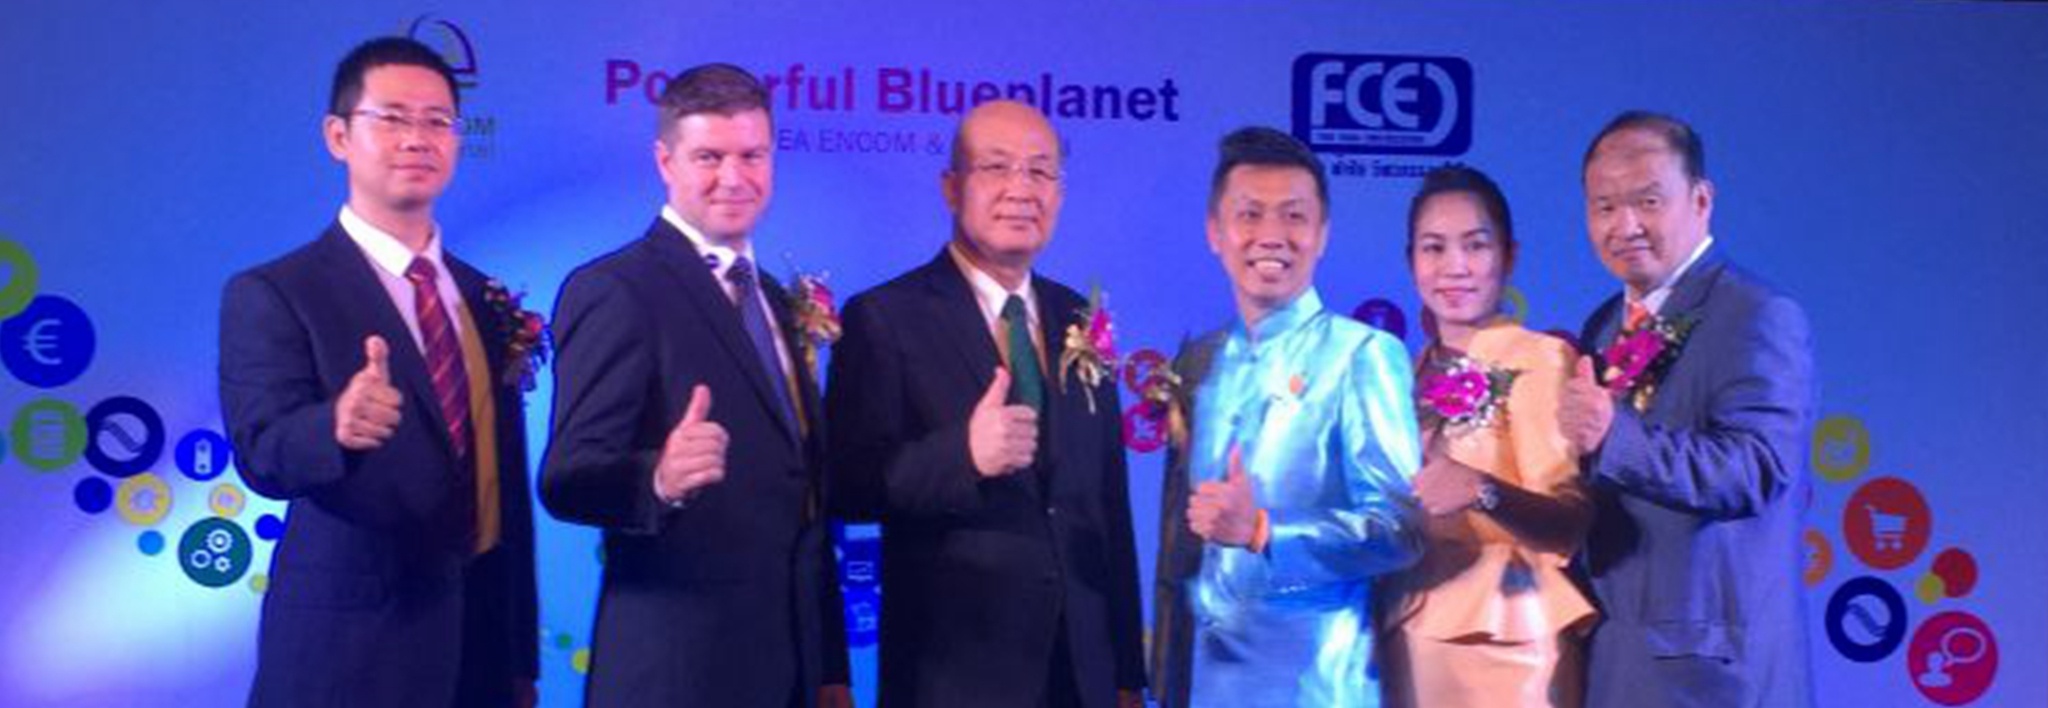 Powerful Blueplanet Press Conference by PEA Encom and FCE in Thailand in 2016